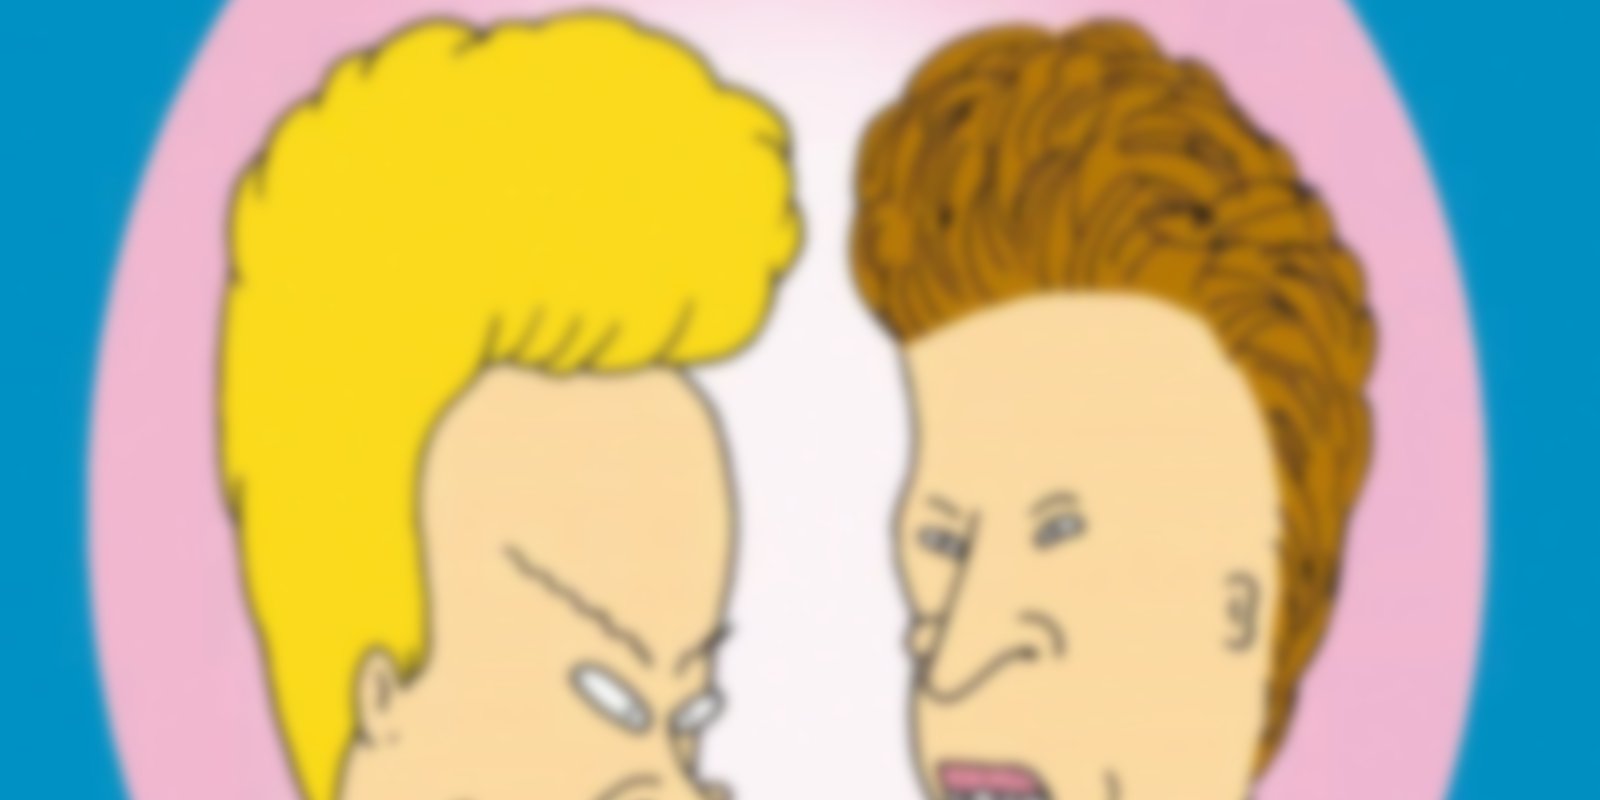 Beavis and Butt-Head - The Mike Judge Collection - Volume 2